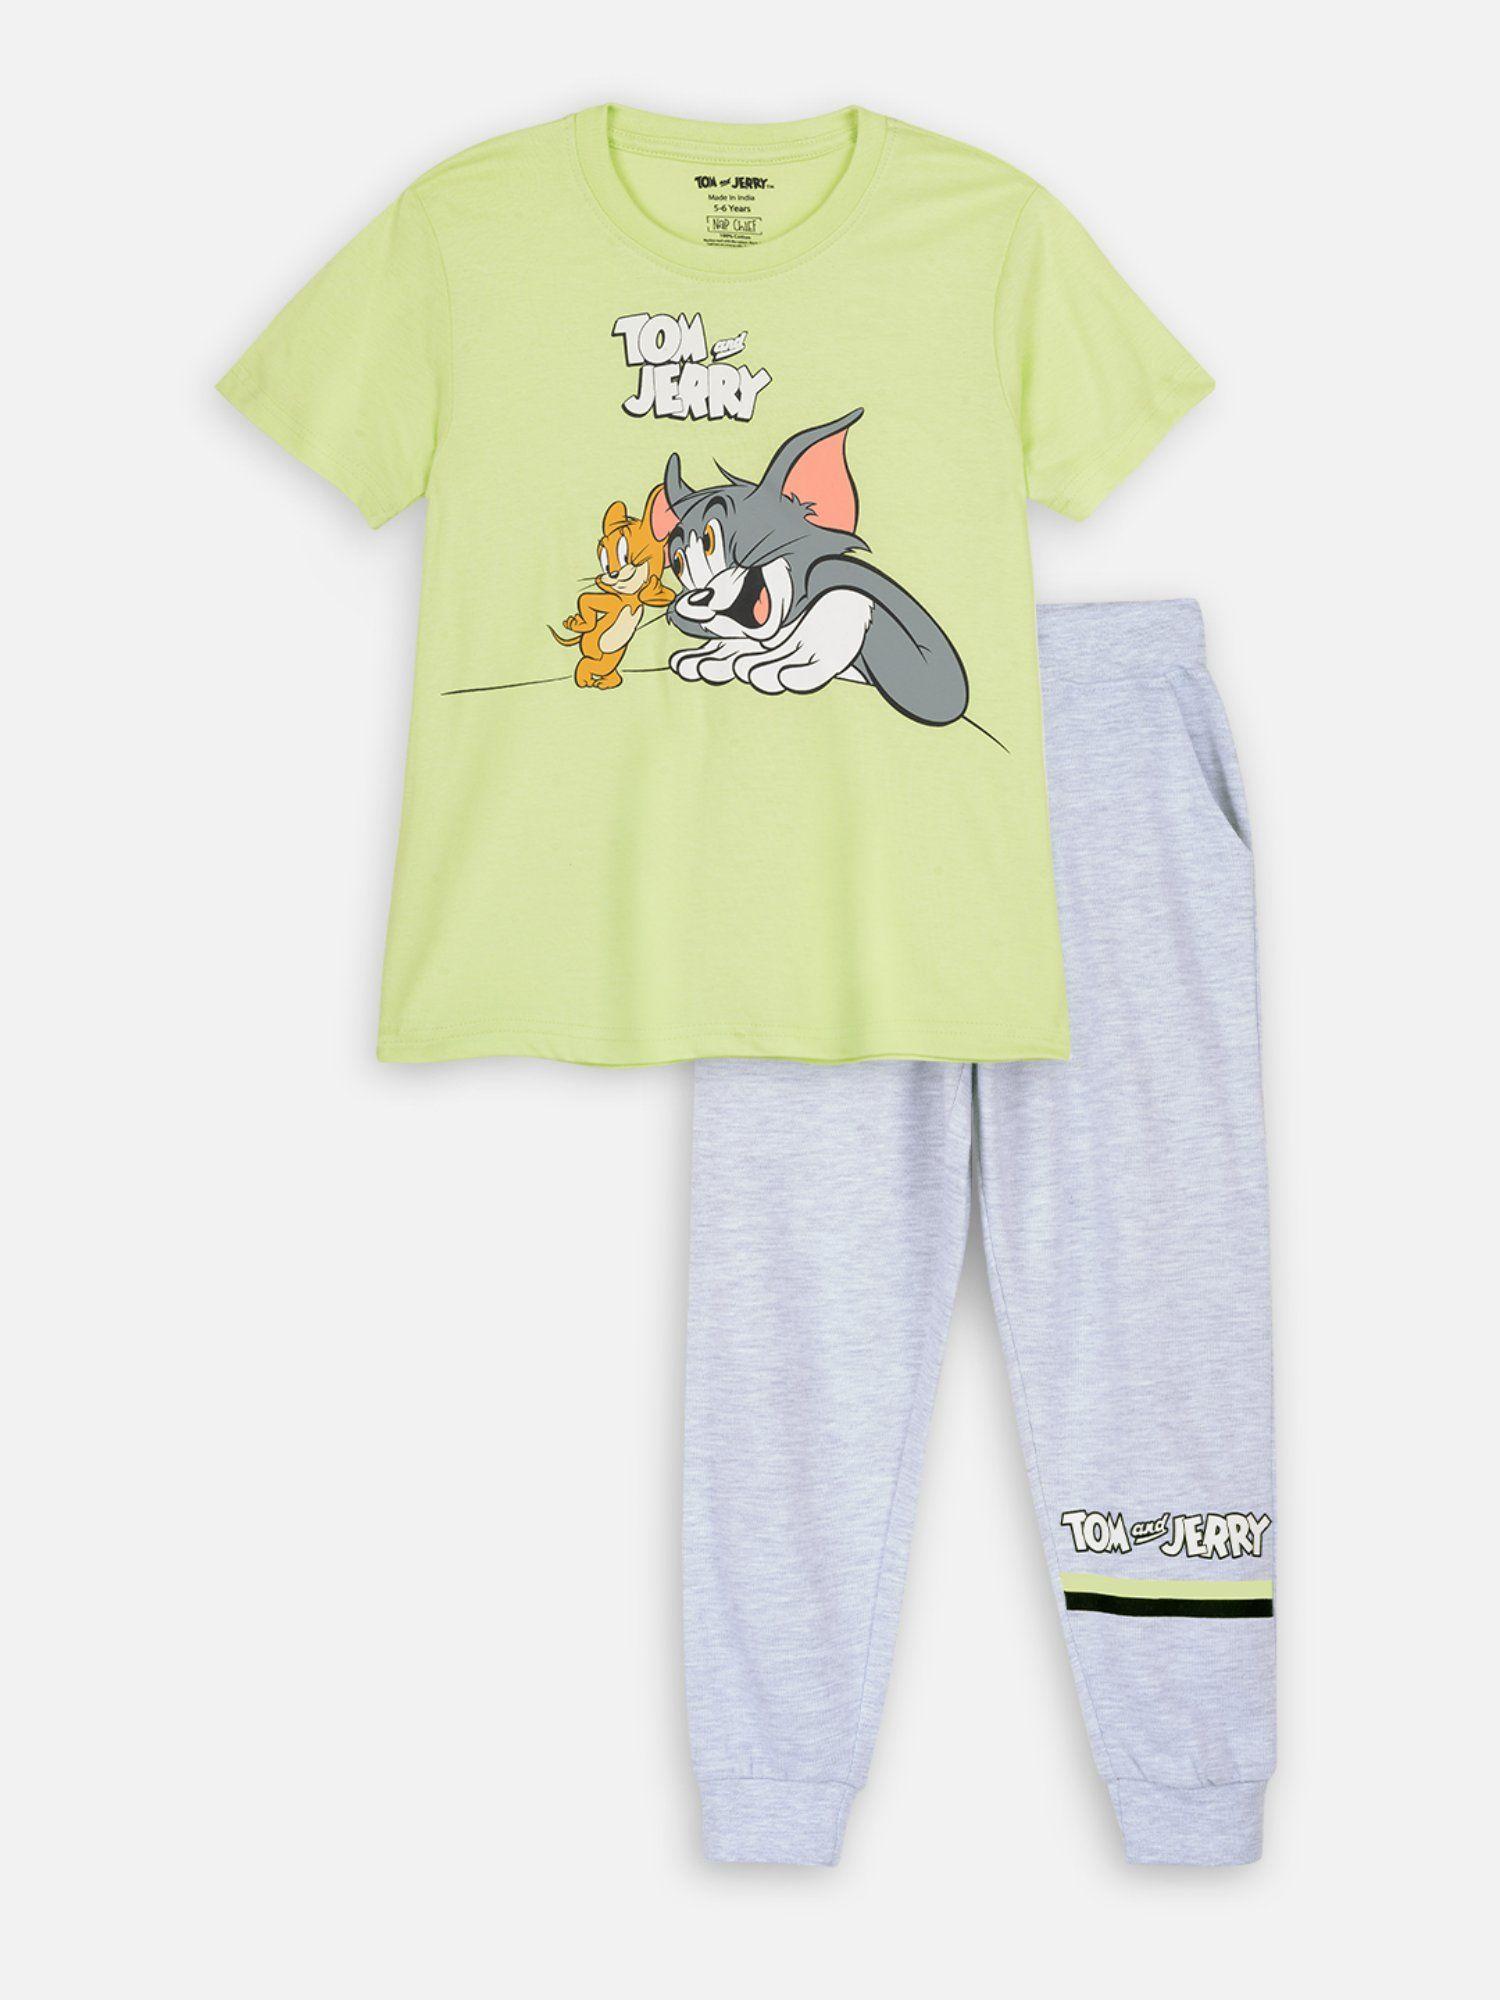 tom & jerry lime green clothing (set of 2)